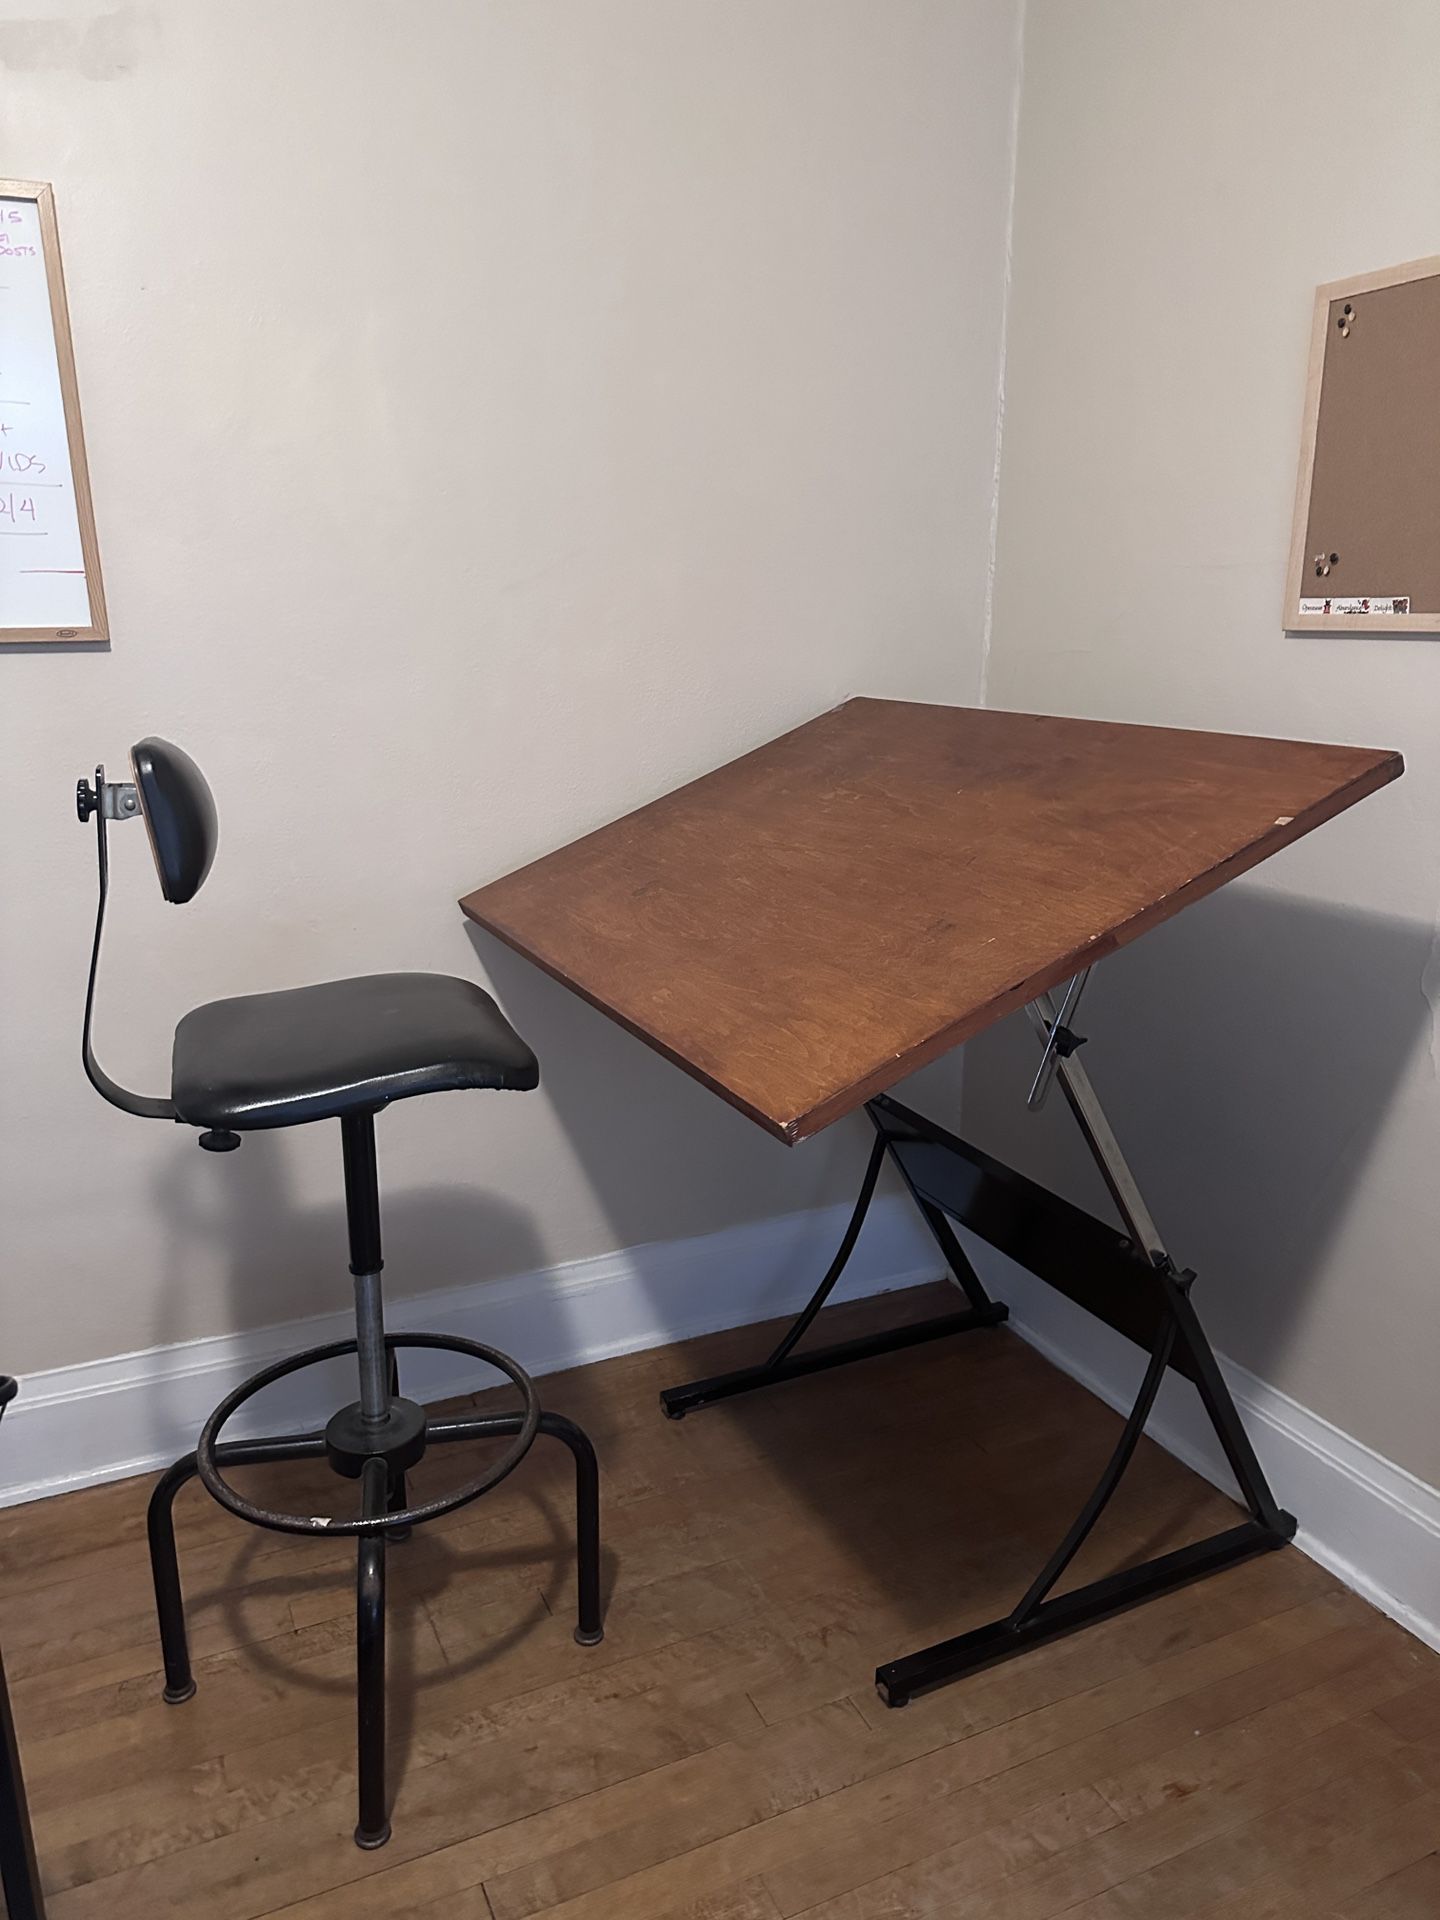 Vintage Drafting Table! Comes With Stool.